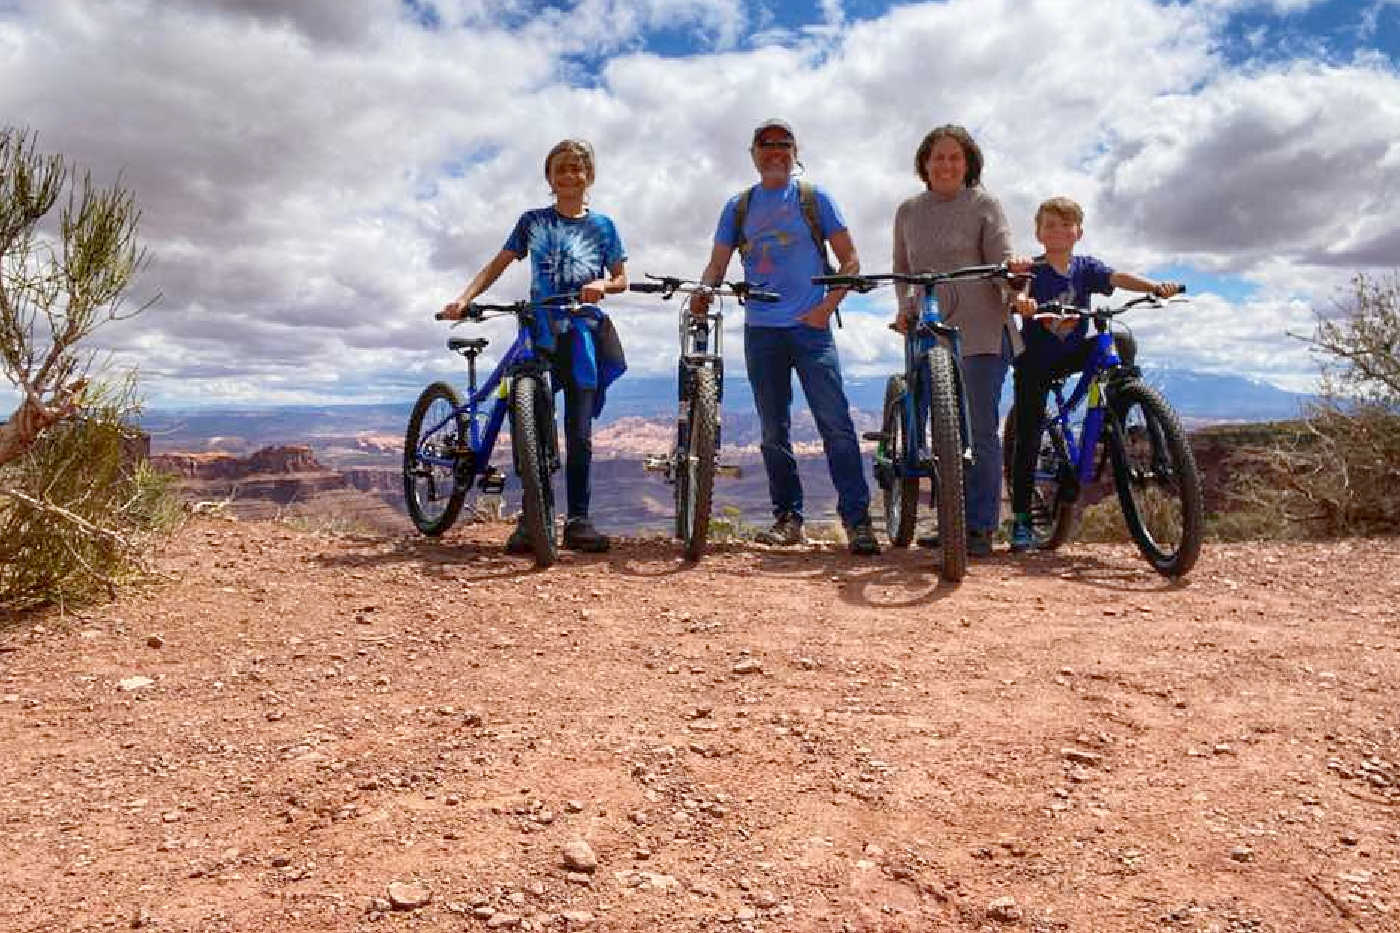 THINGS TO DO IN MOAB: A PERFECT 4-DAY ITINERARY